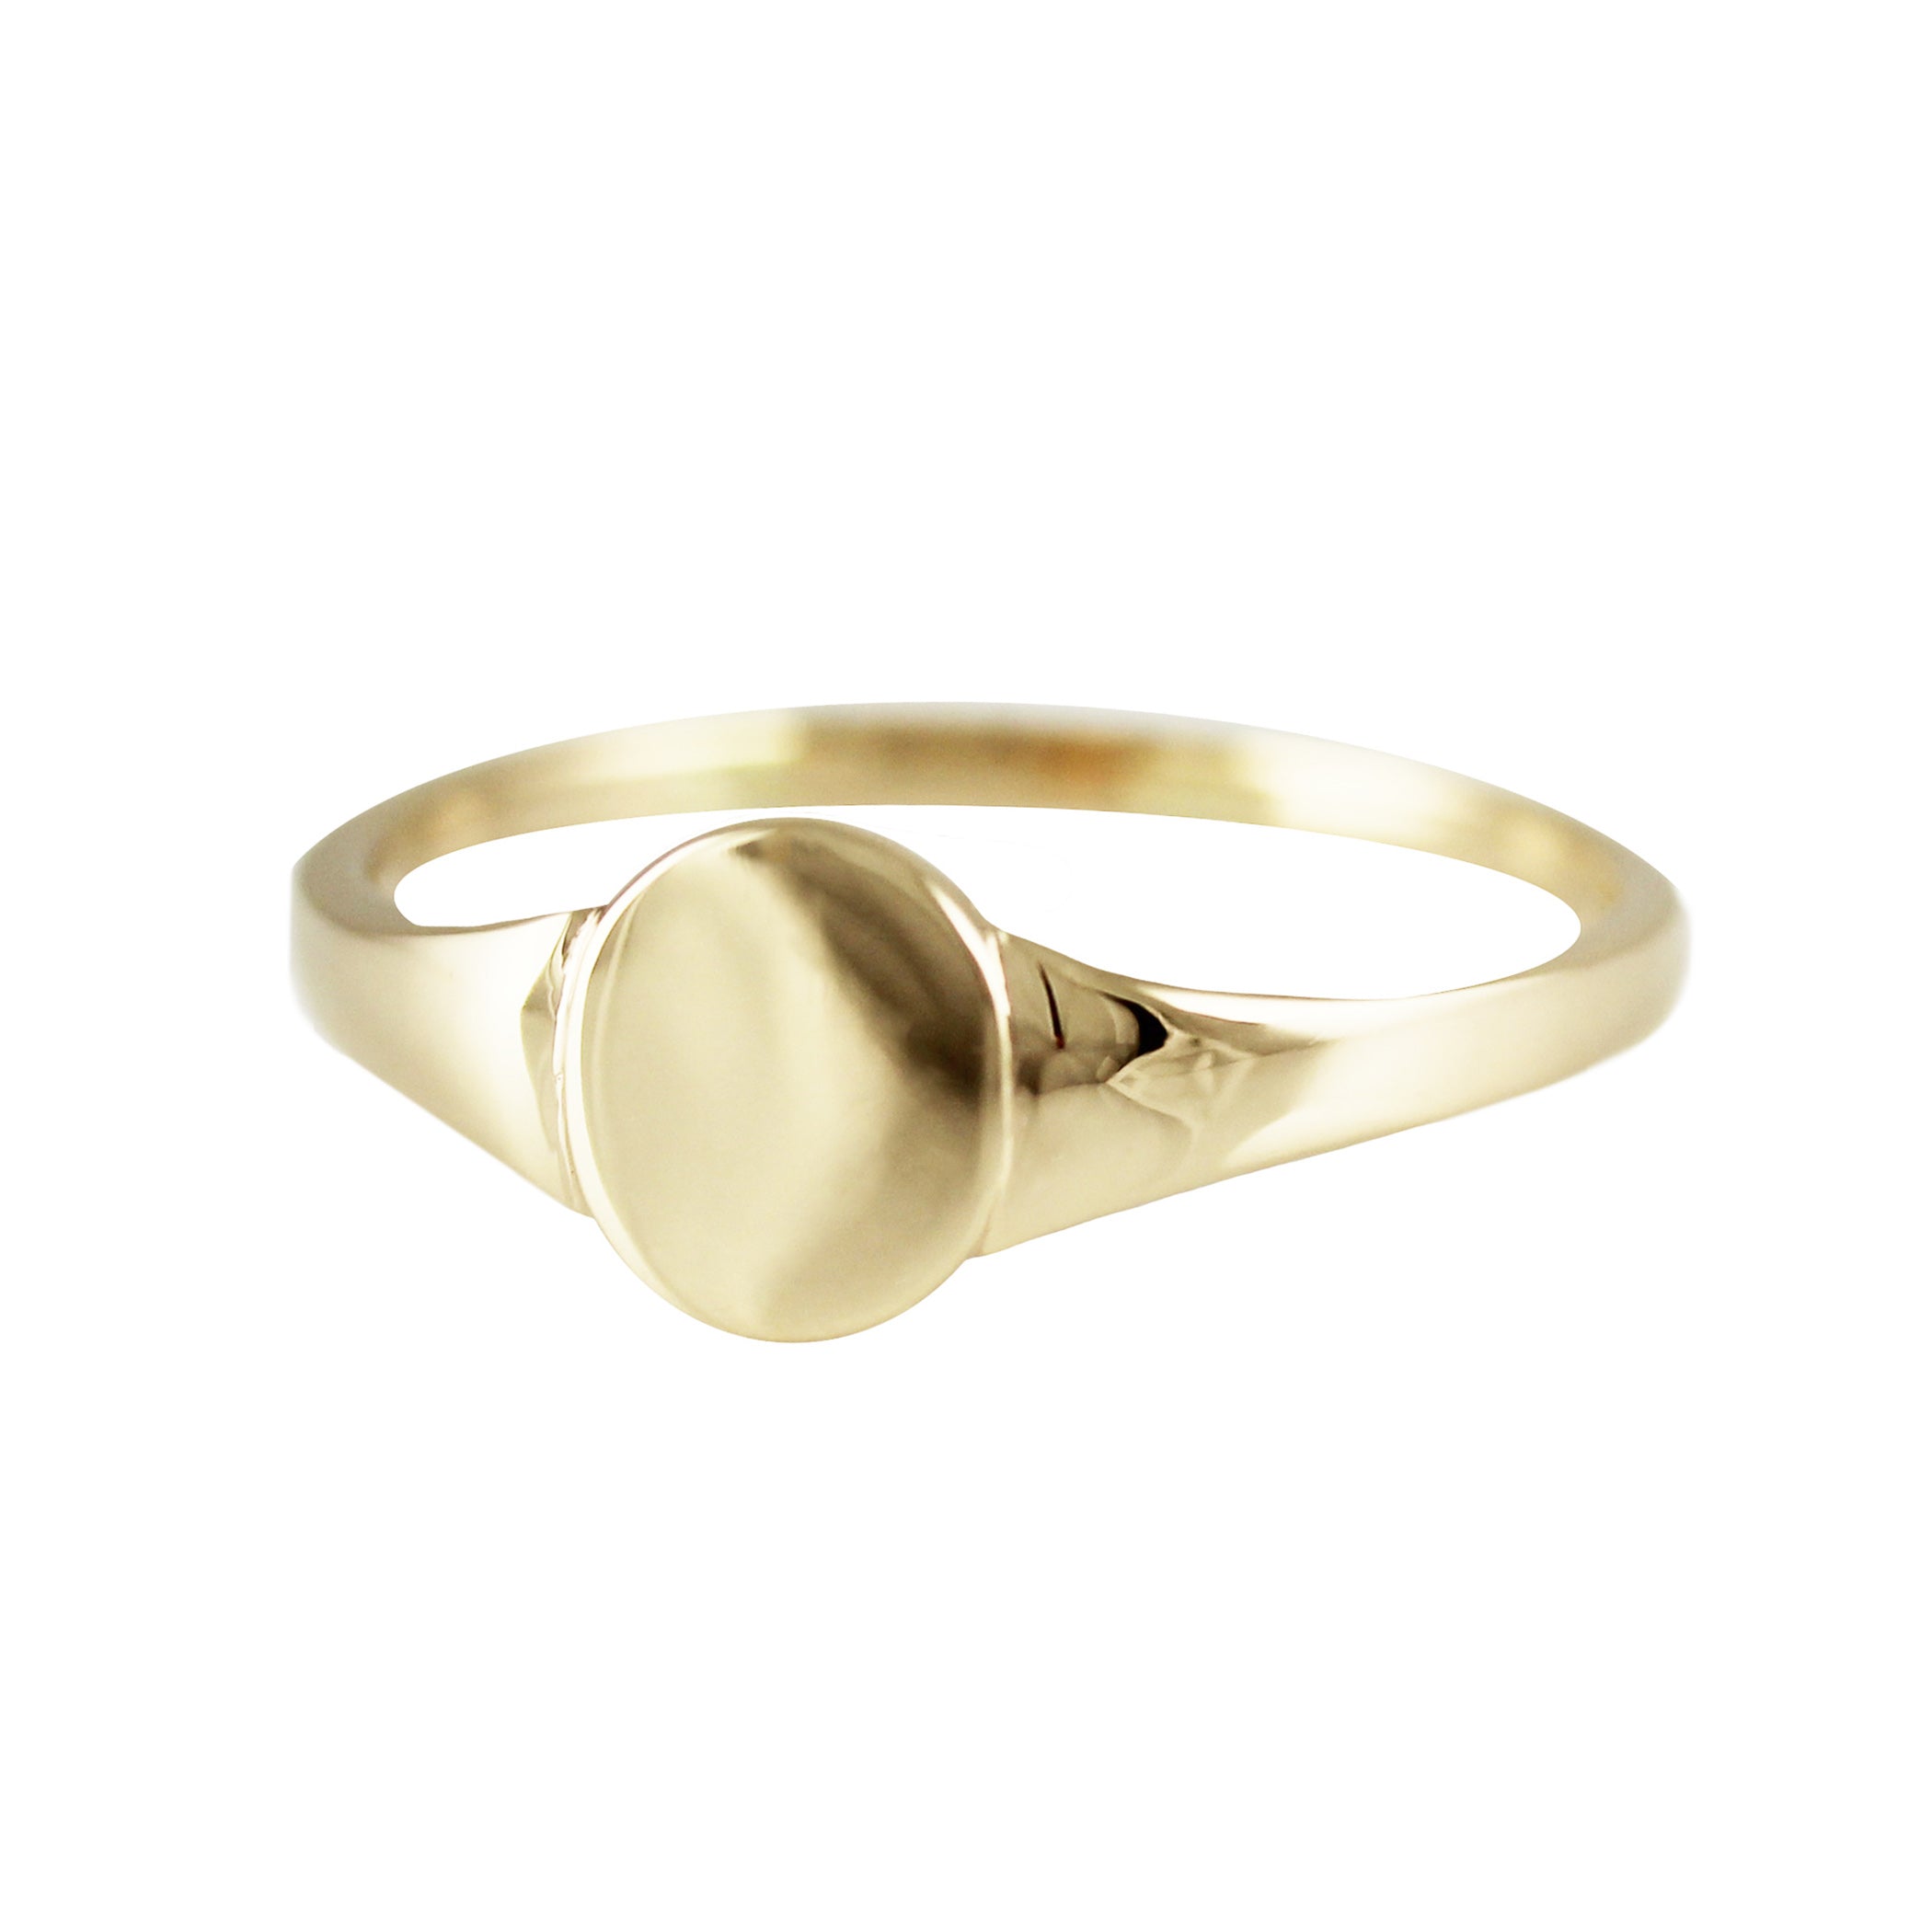 14k Solid Gold Mini Star Ring Tiny Star Stacking Ring 